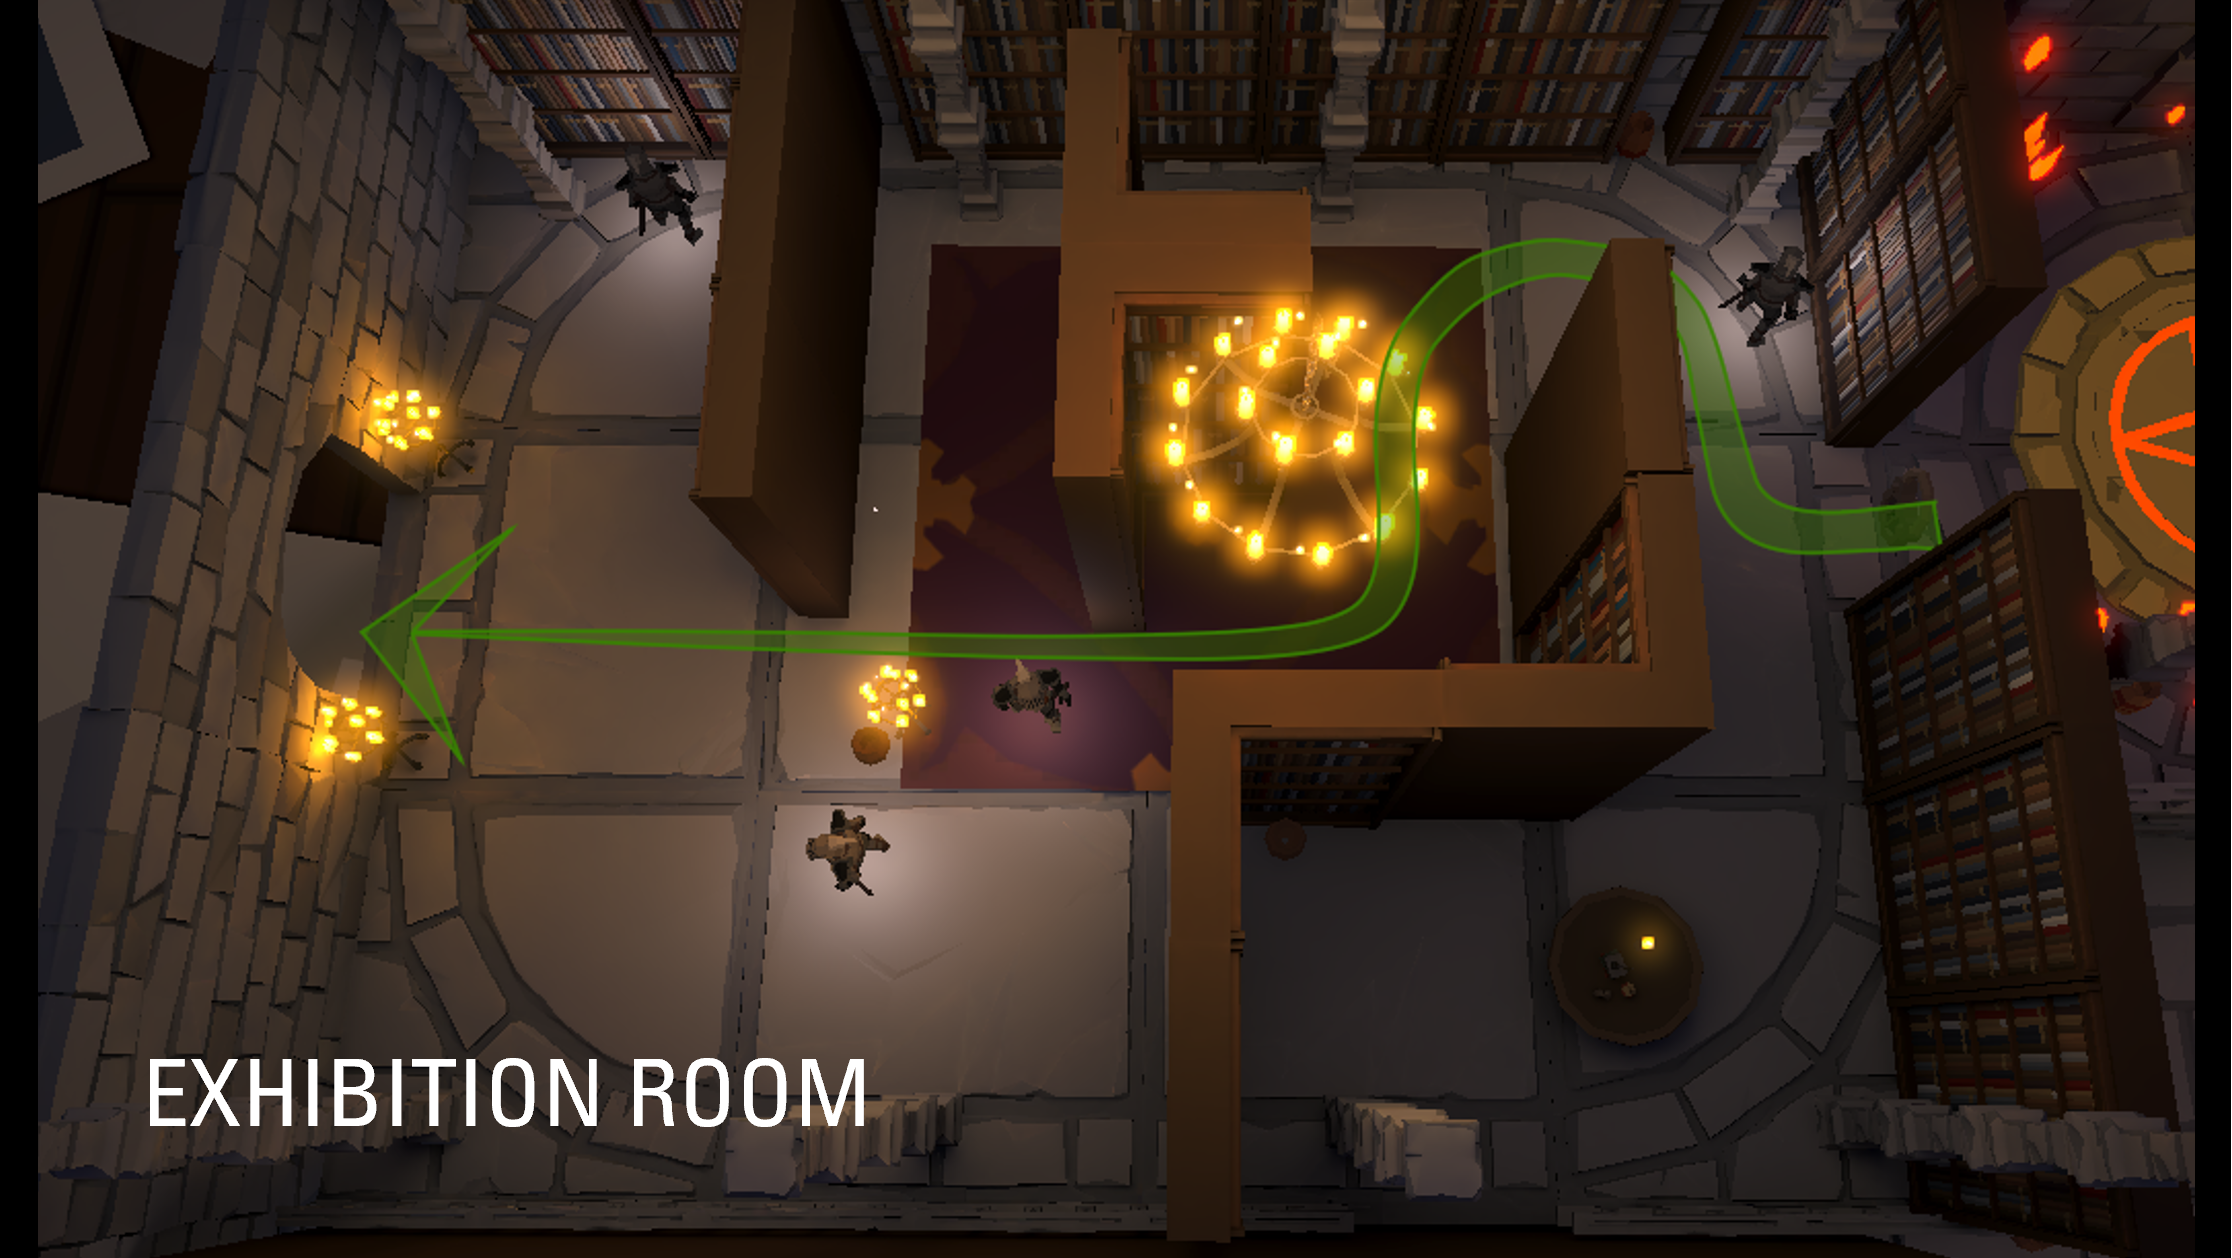 The final room